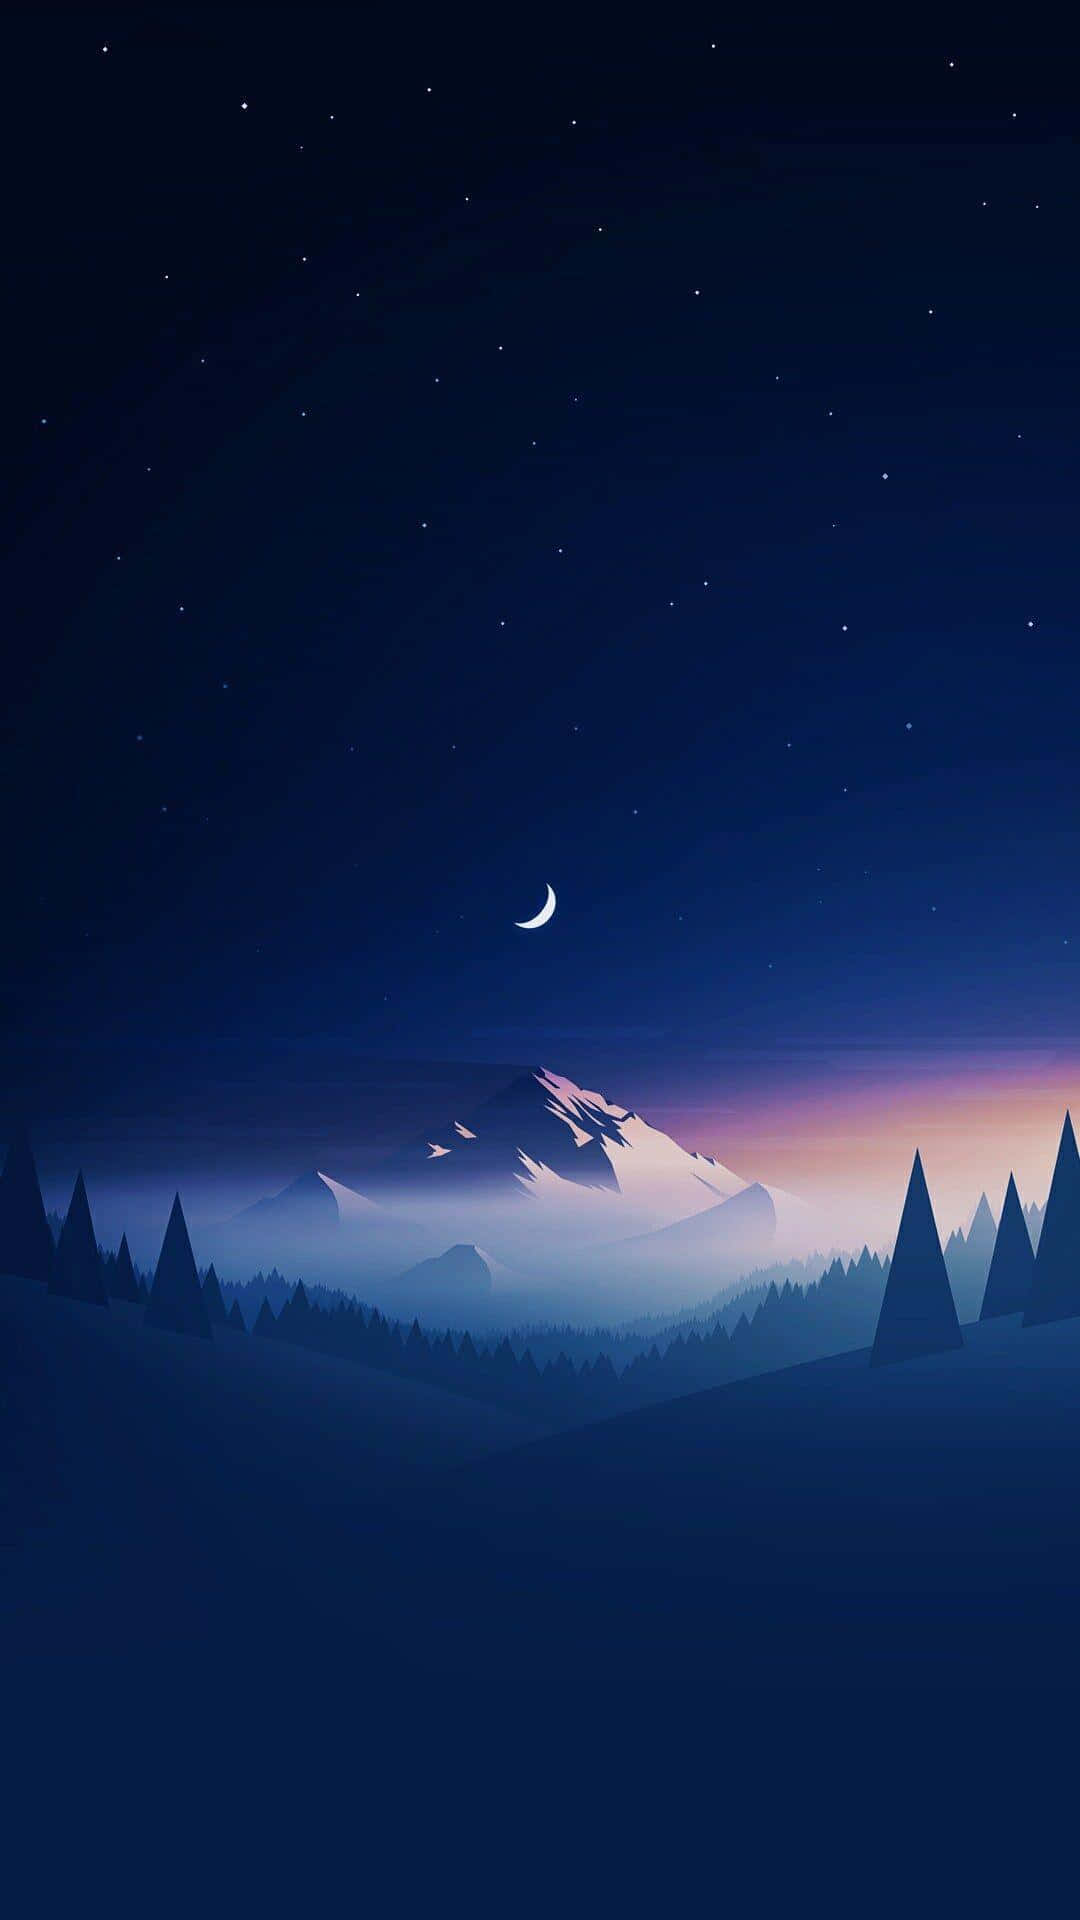 A Night Landscape With Trees And A Moon Wallpaper